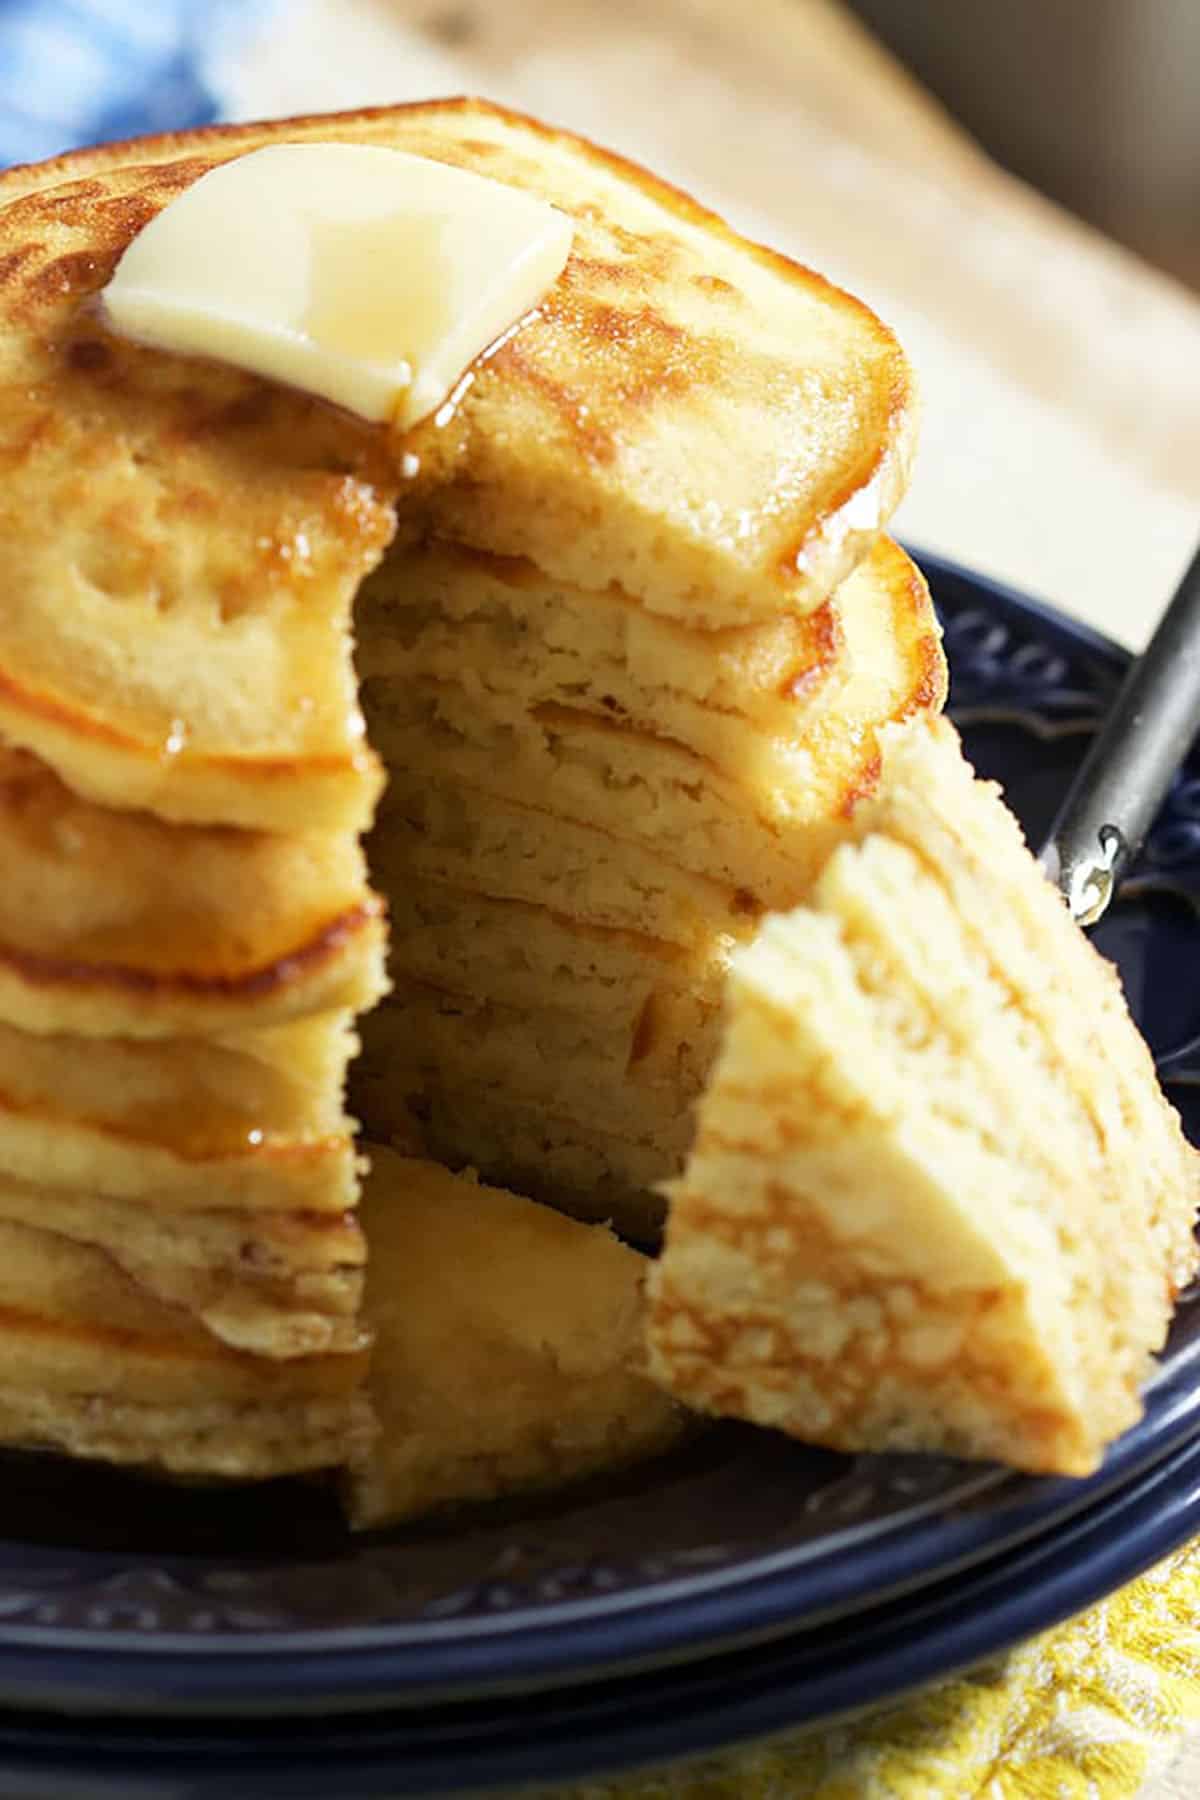 Stack of pancakes with a wedges cut out and on a fork.